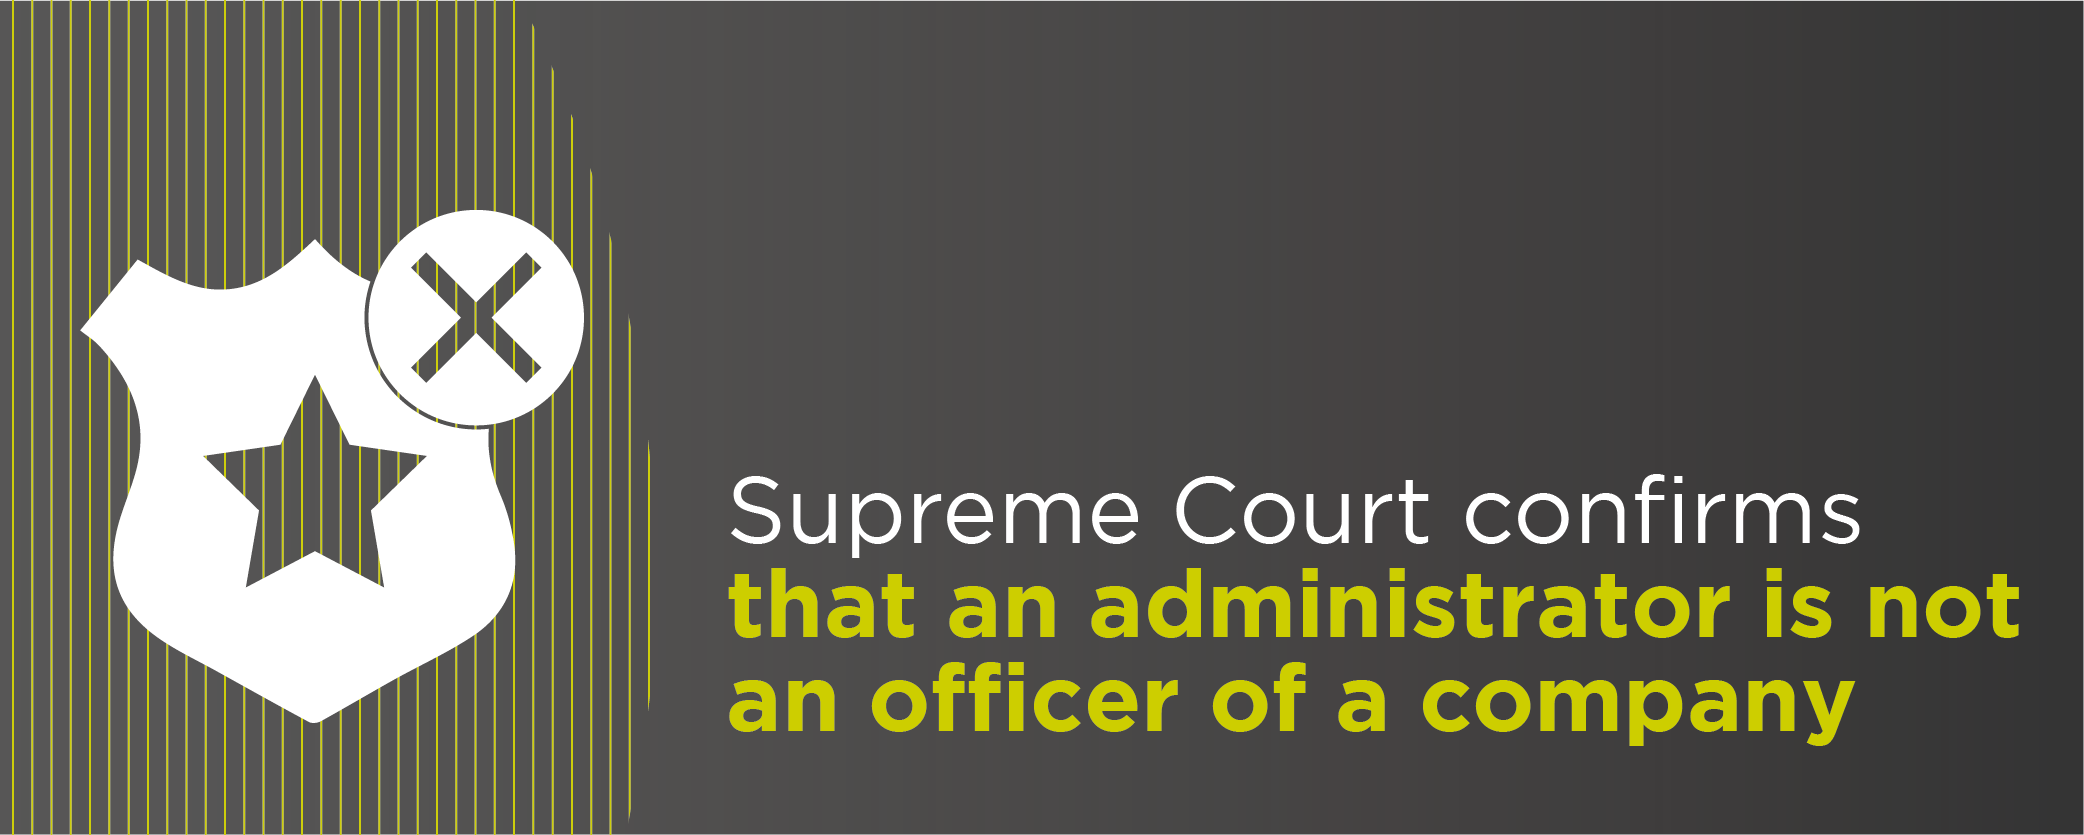 Supreme Court confirms that an administrator is not an officer of a company